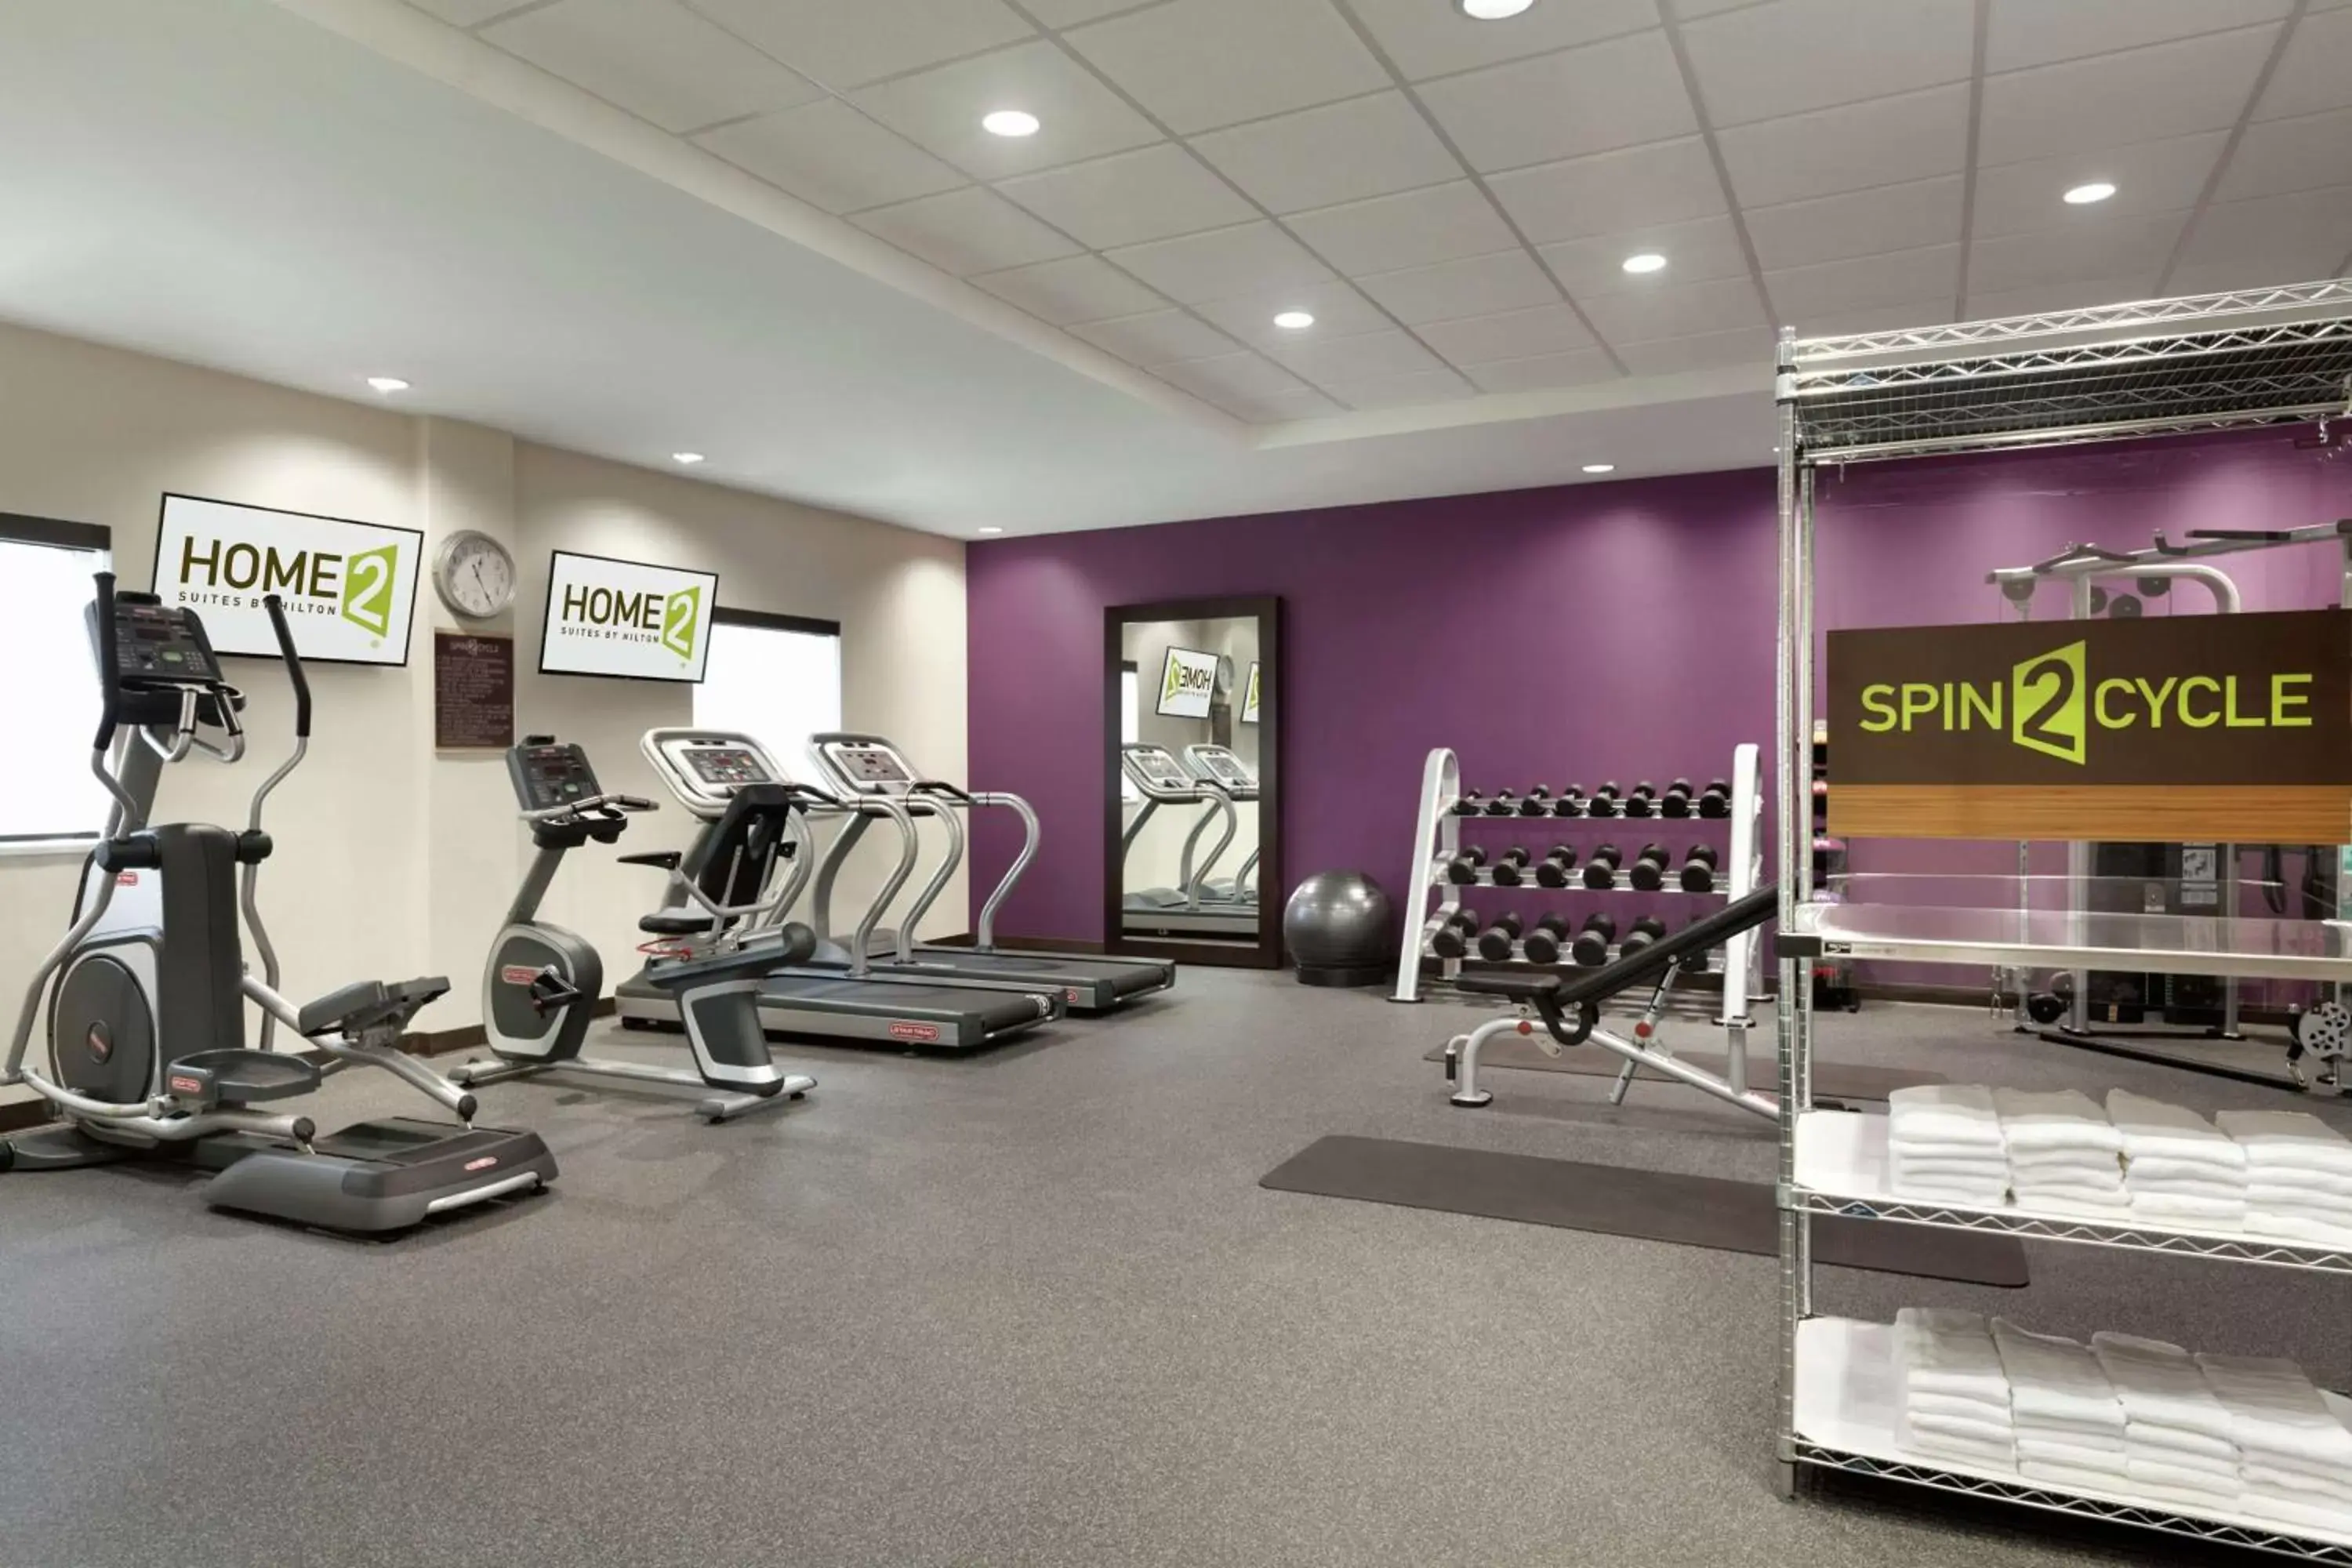 Fitness centre/facilities, Fitness Center/Facilities in Home2 Suites by Hilton West Monroe